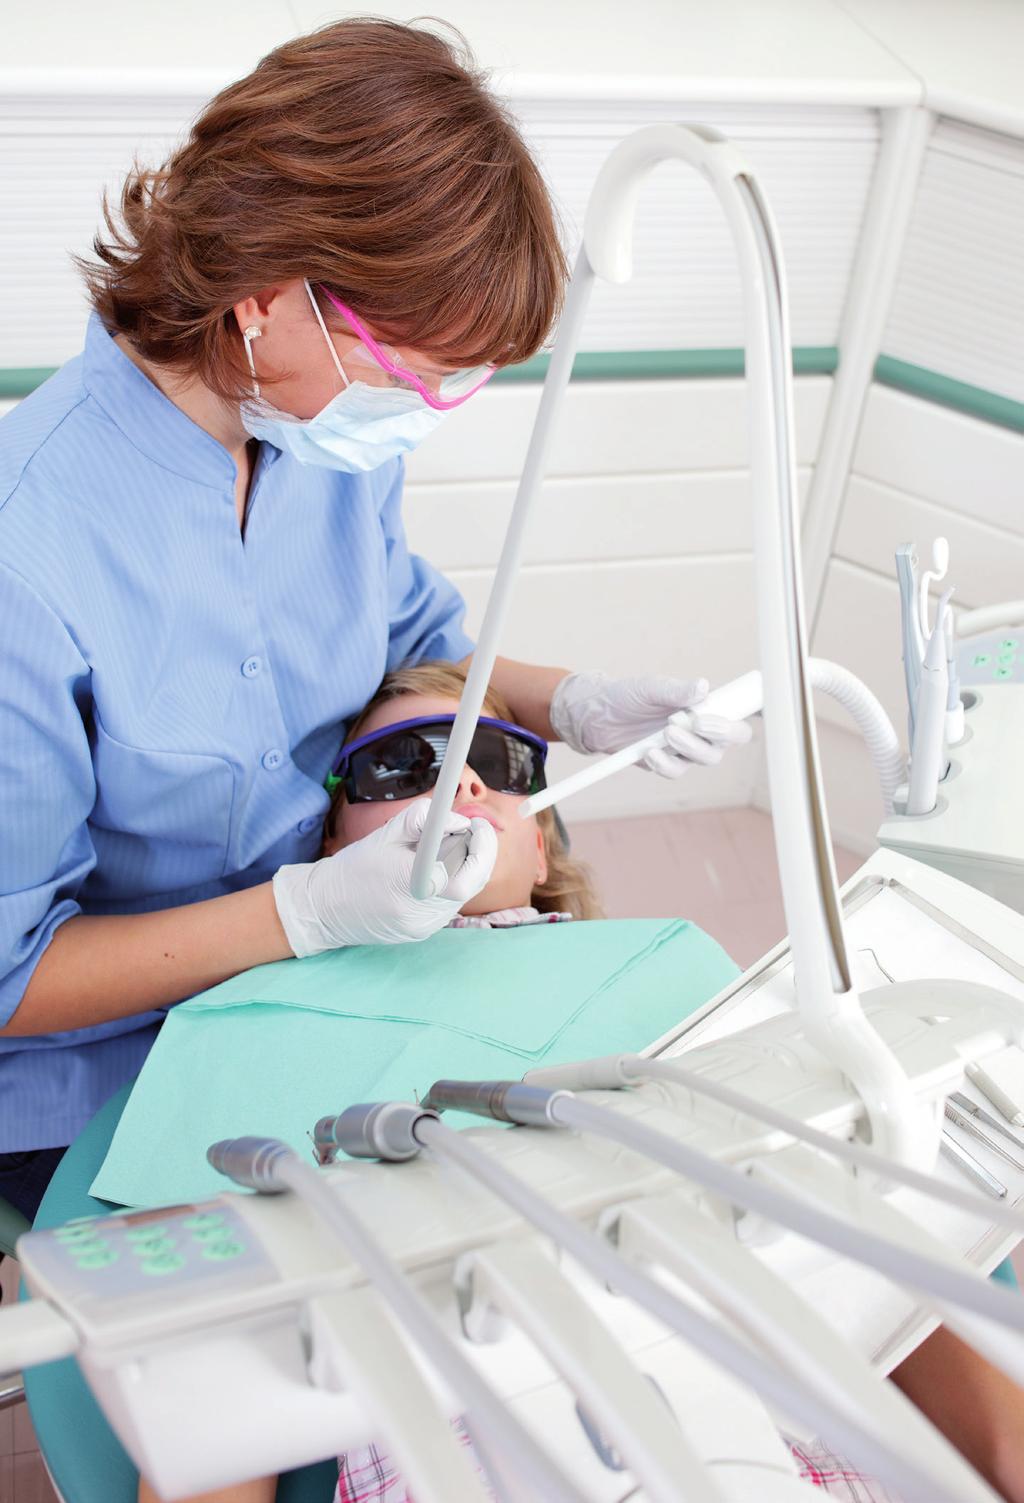 EVERYTHING WITHIN REACH Instruments, trays, suction head, and cuspidor are all easy to reach